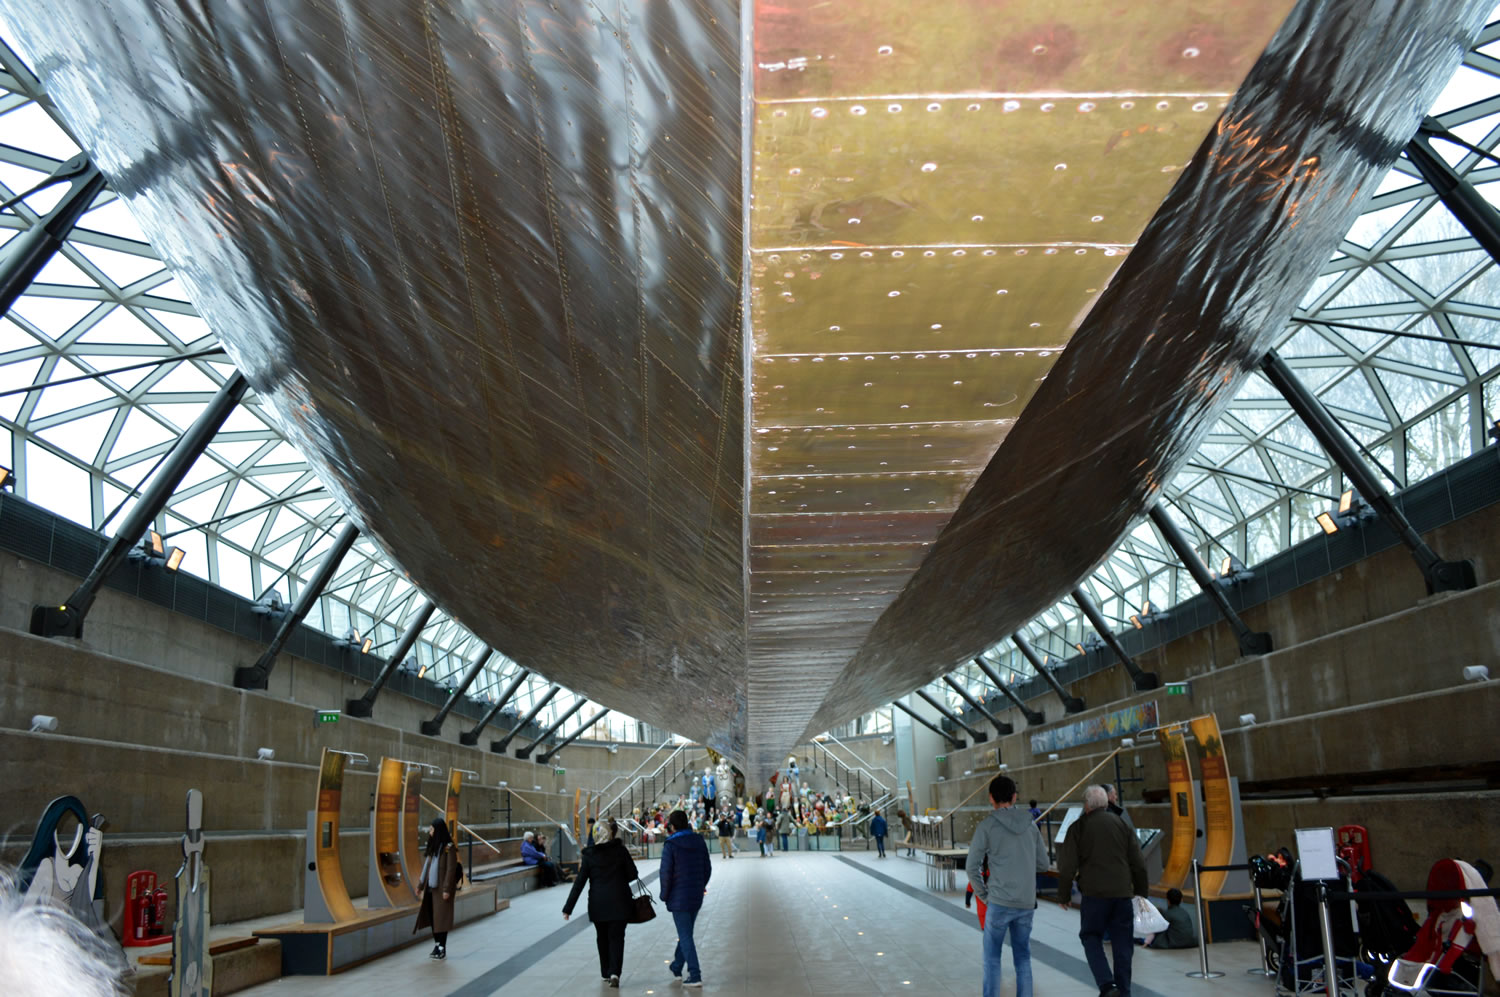 Modern drydock museum underneath the copper plated hull of the Cutty Sark. Image: Nick Thorne 2018